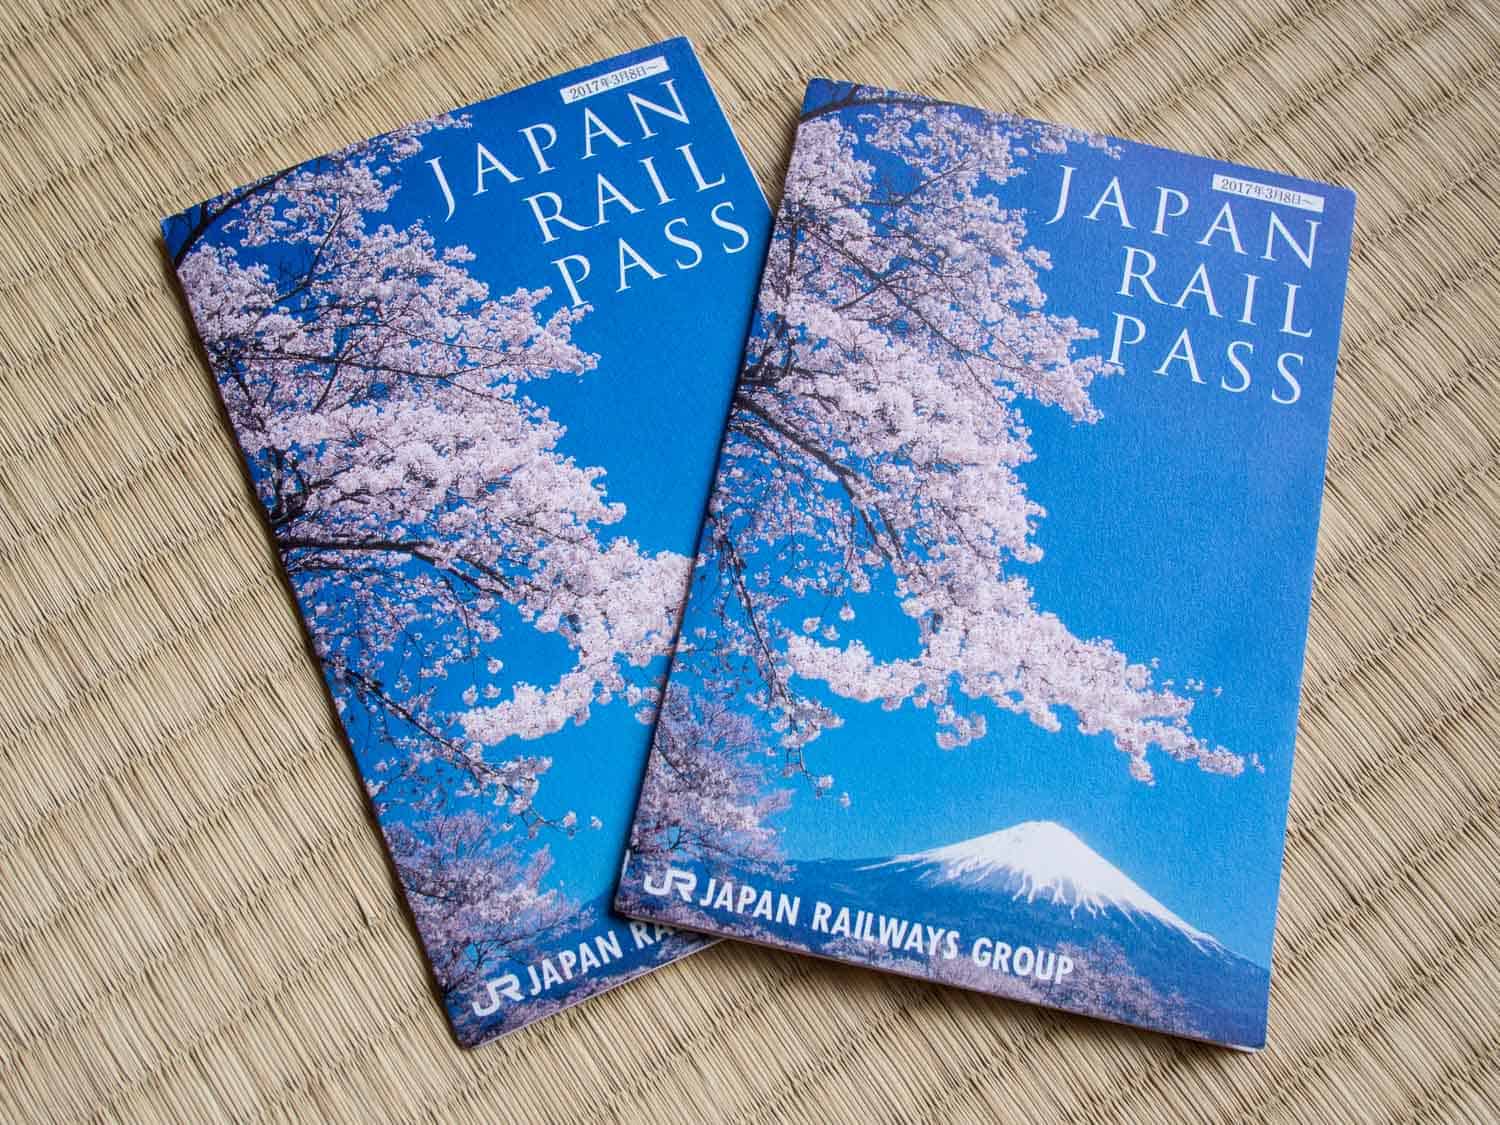 A guide to whether a Japan rail pass is worth it.